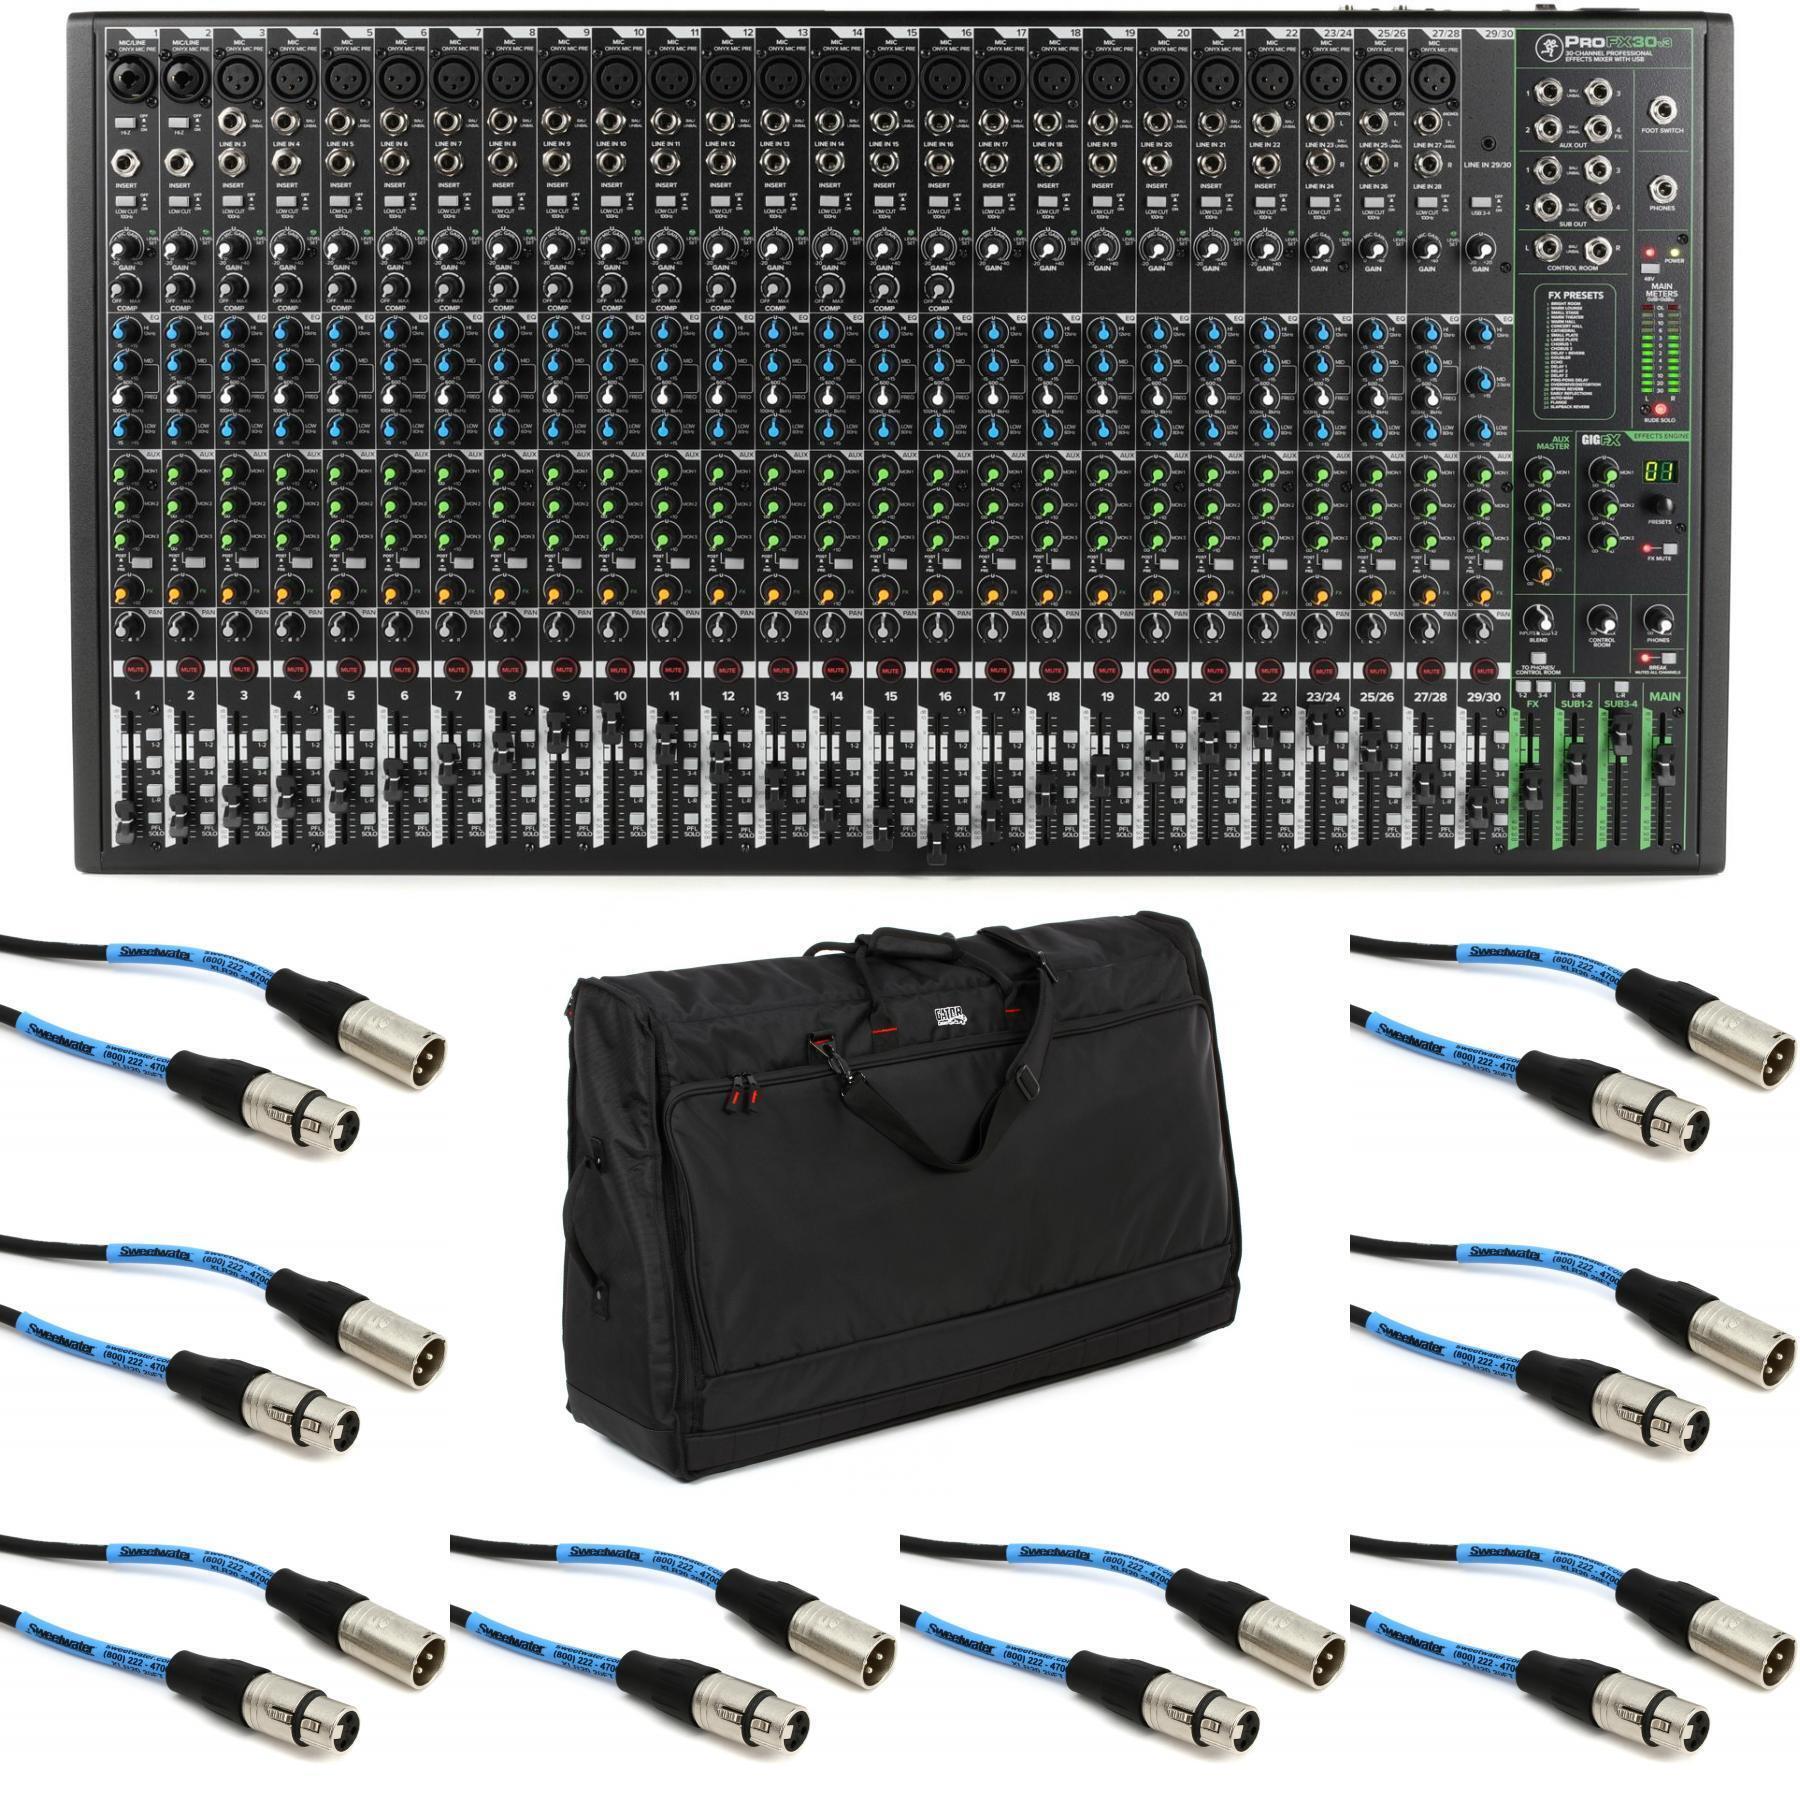 Mackie ProFX30v3 30-channel Mixer with USB and Effects | Sweetwater